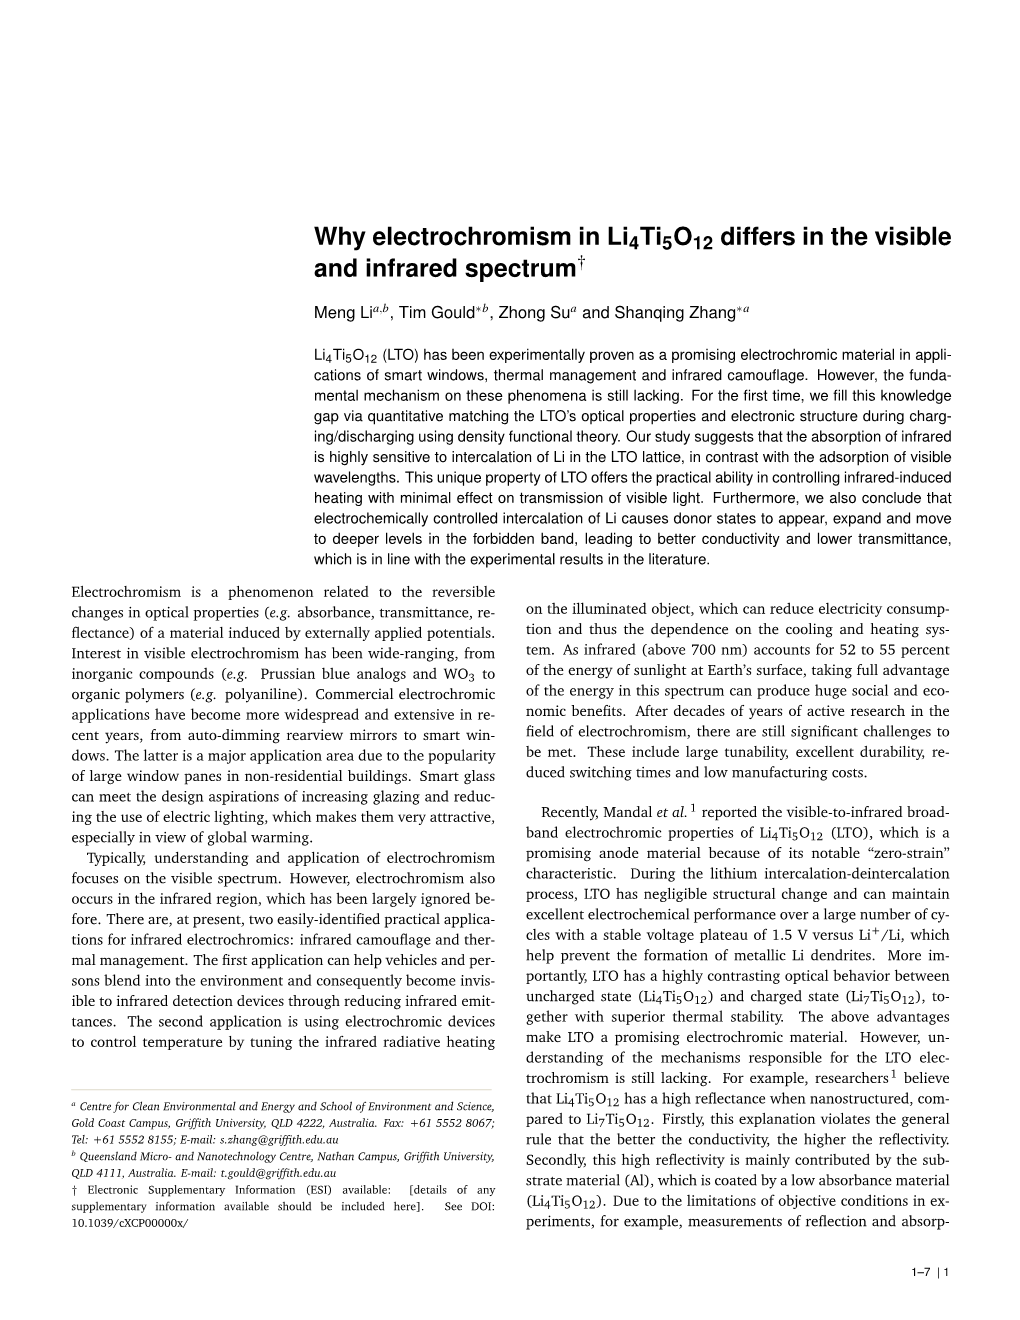 Why Electrochromism in Li4ti5o12 Differs in the Visible and Infrared Spectrum†